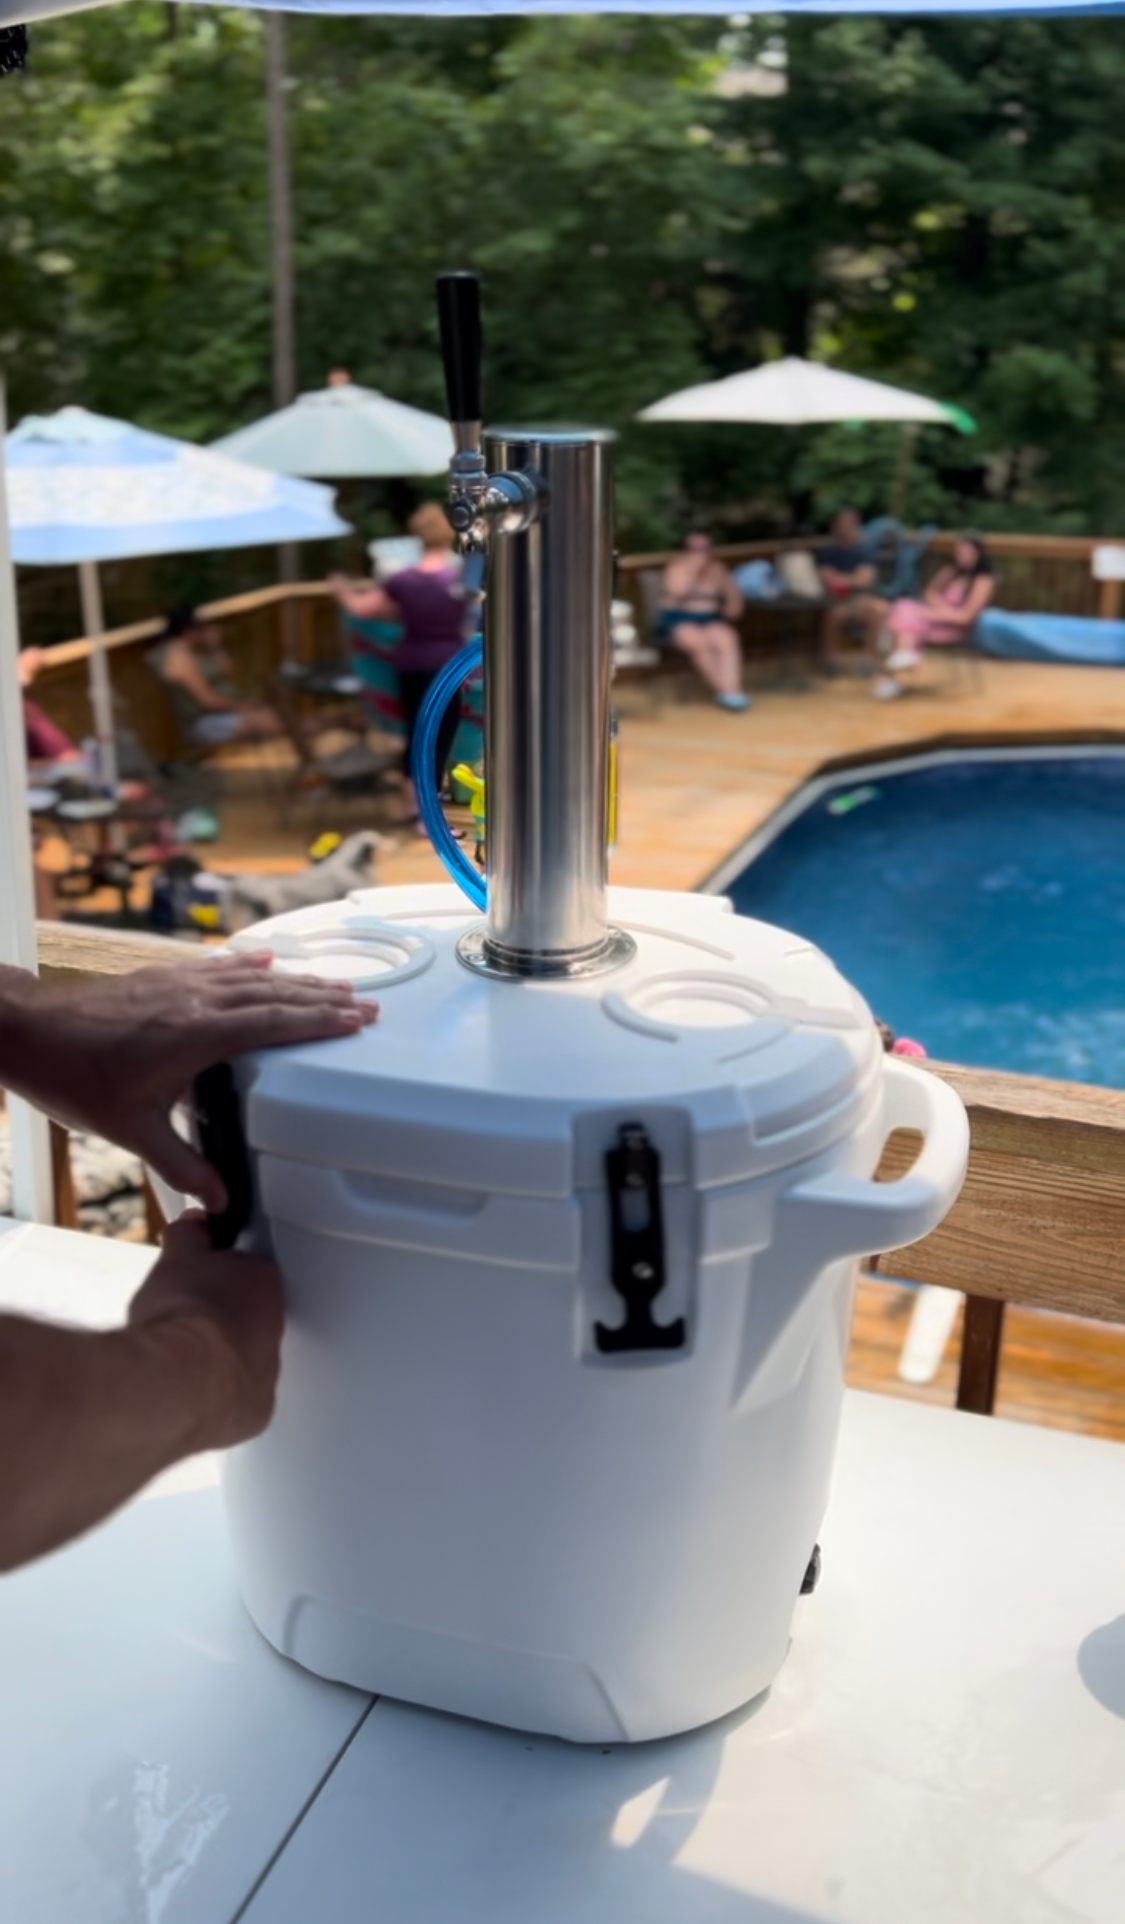 ColdOne in use at a pool party